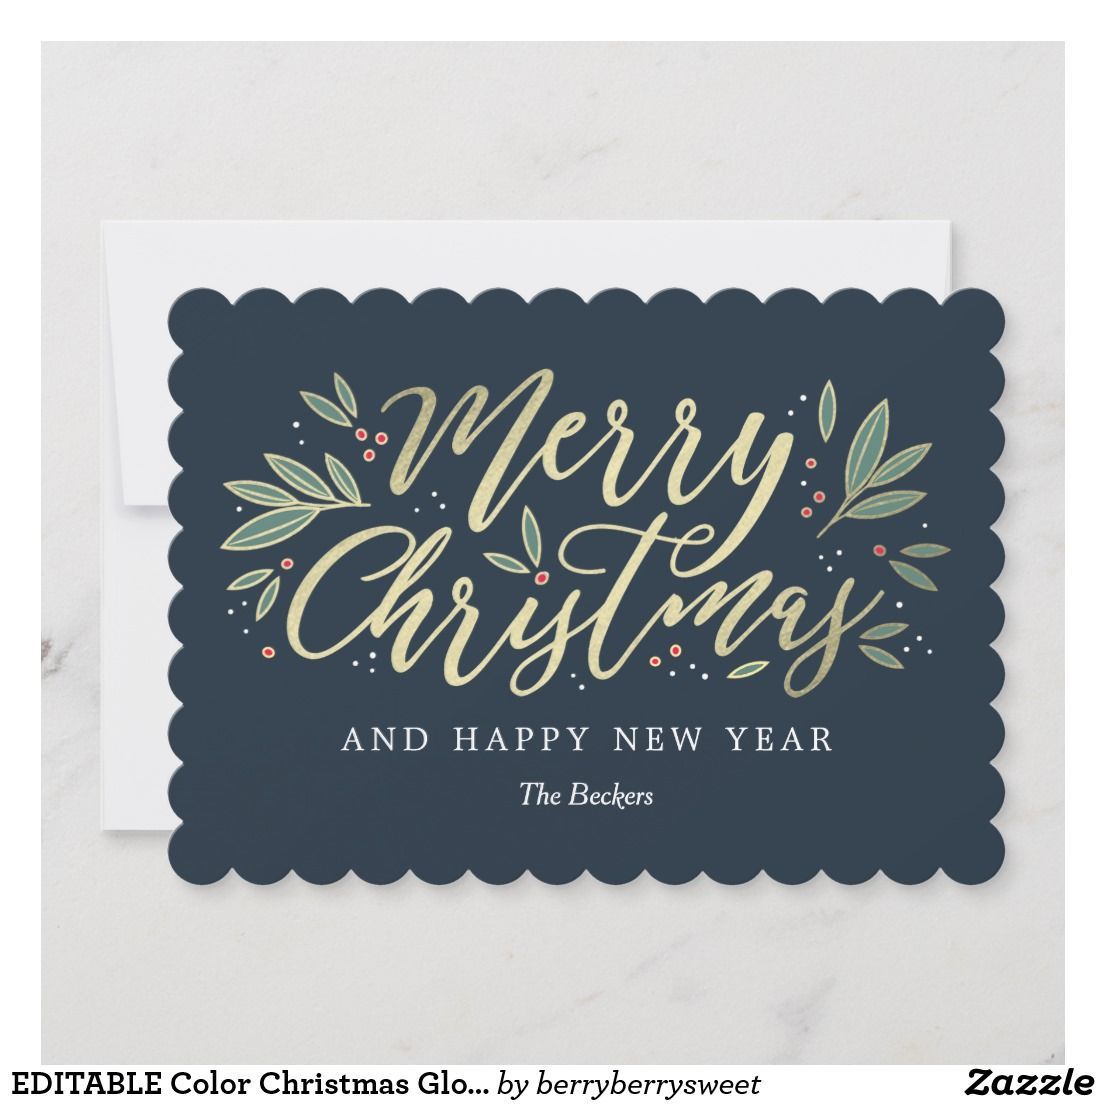 15 holiday Cards quotes ideas